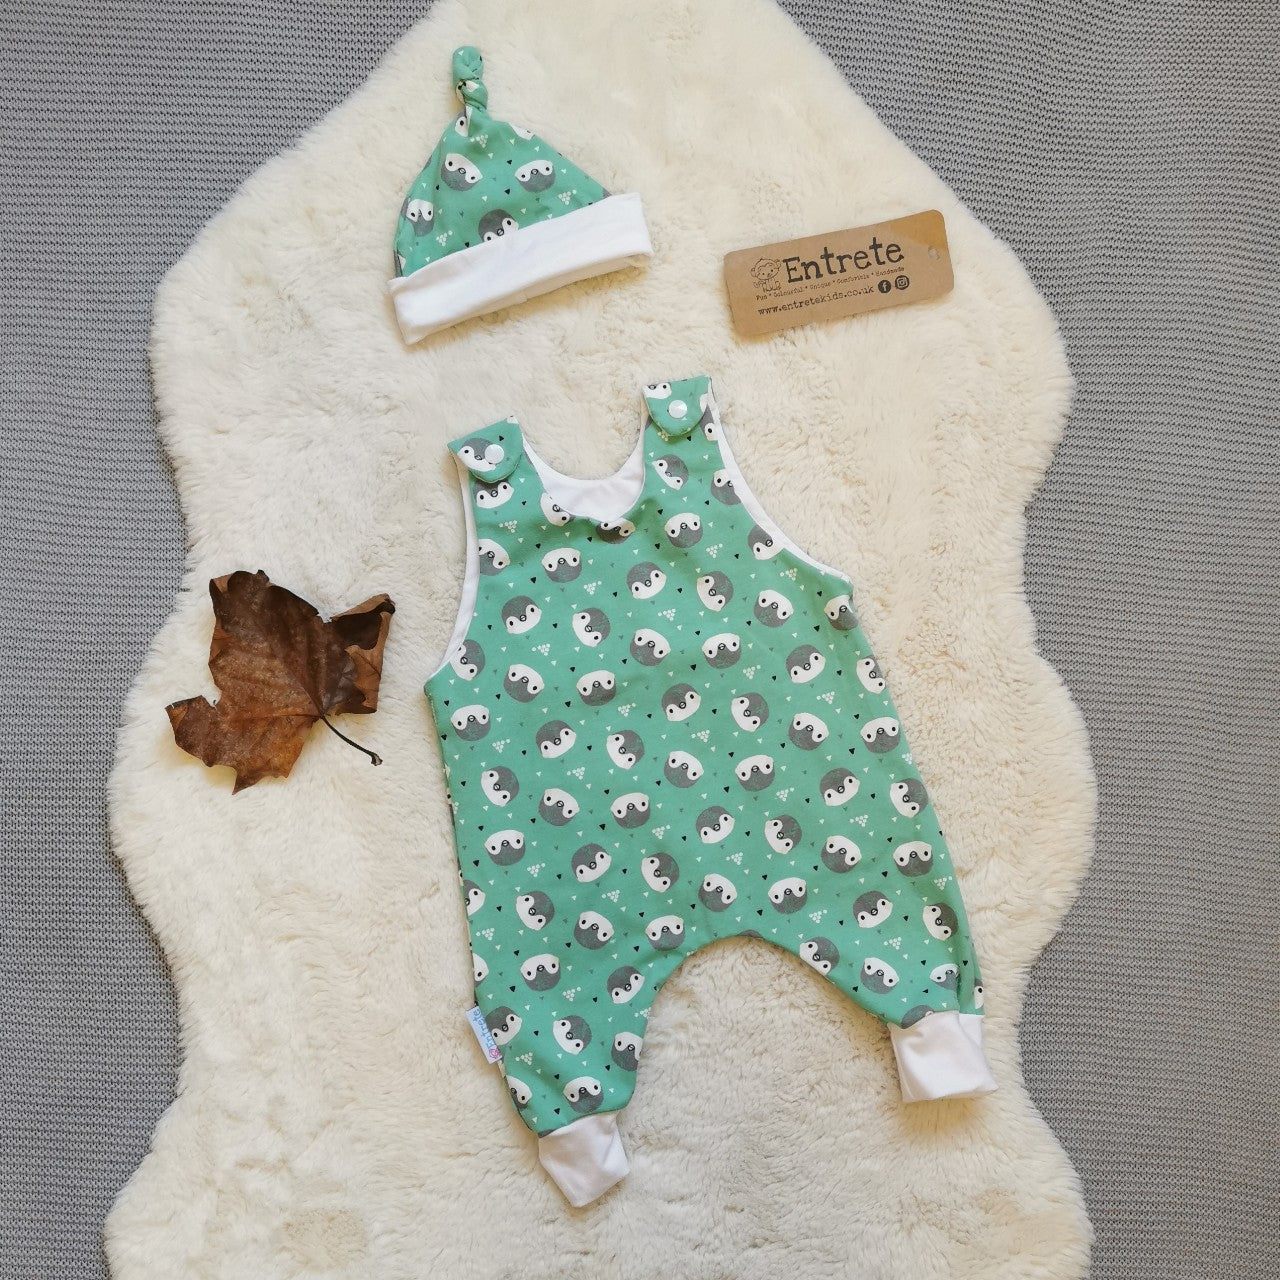 A romper gift set shown in mint penguins for demonstration purposes, your gift set will be handmade using navy pirates cotton jersey.